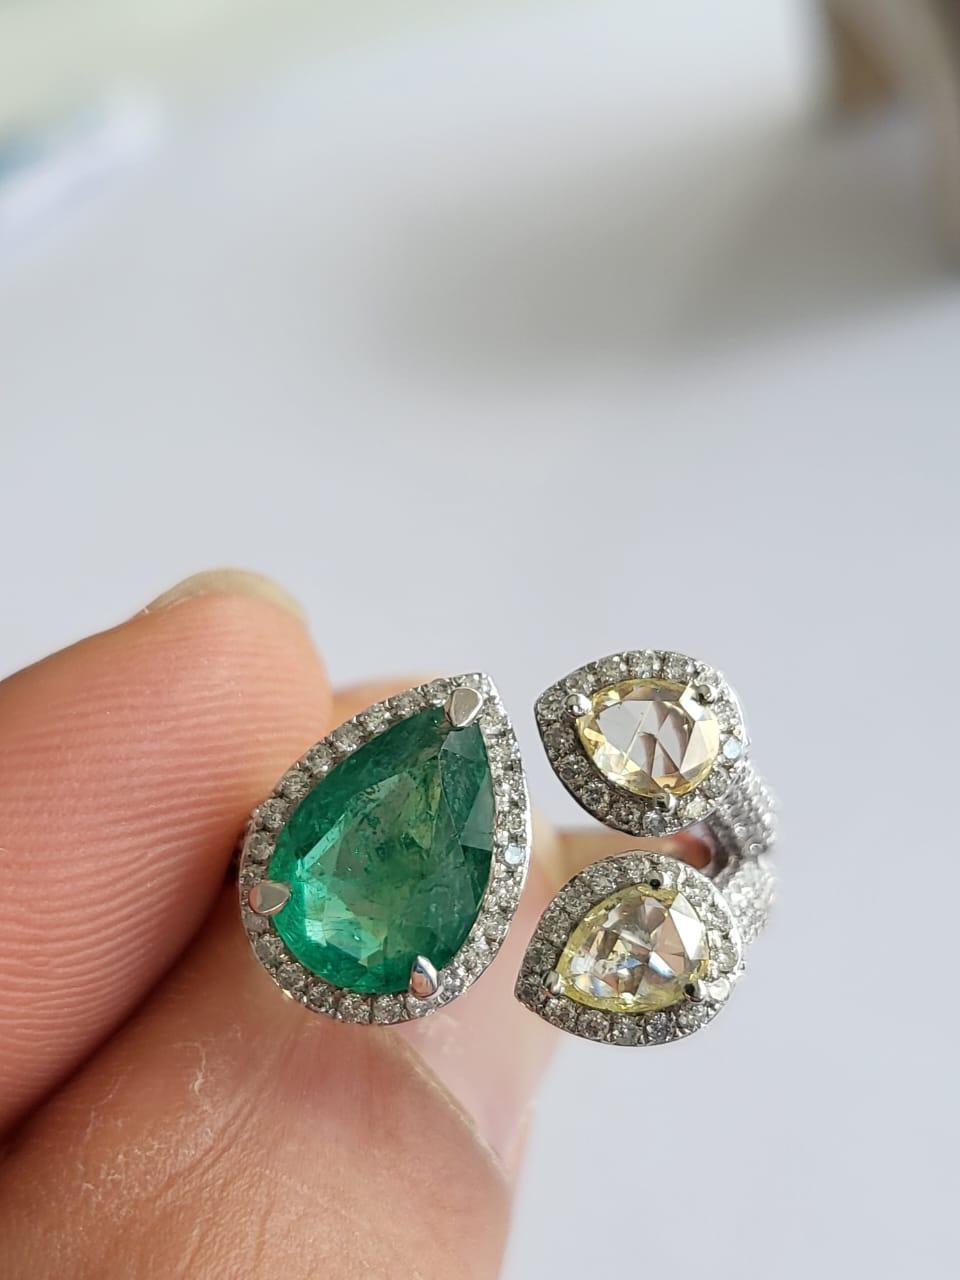 A very beautiful and modern, Emerald Engagement Wedding Ring set in 18K White Gold & Diamonds. The weight of the pear shaped Emerald is 1.72 carats. The Emerald is completely natural, without any treatment and is of Zambian origin. The combined